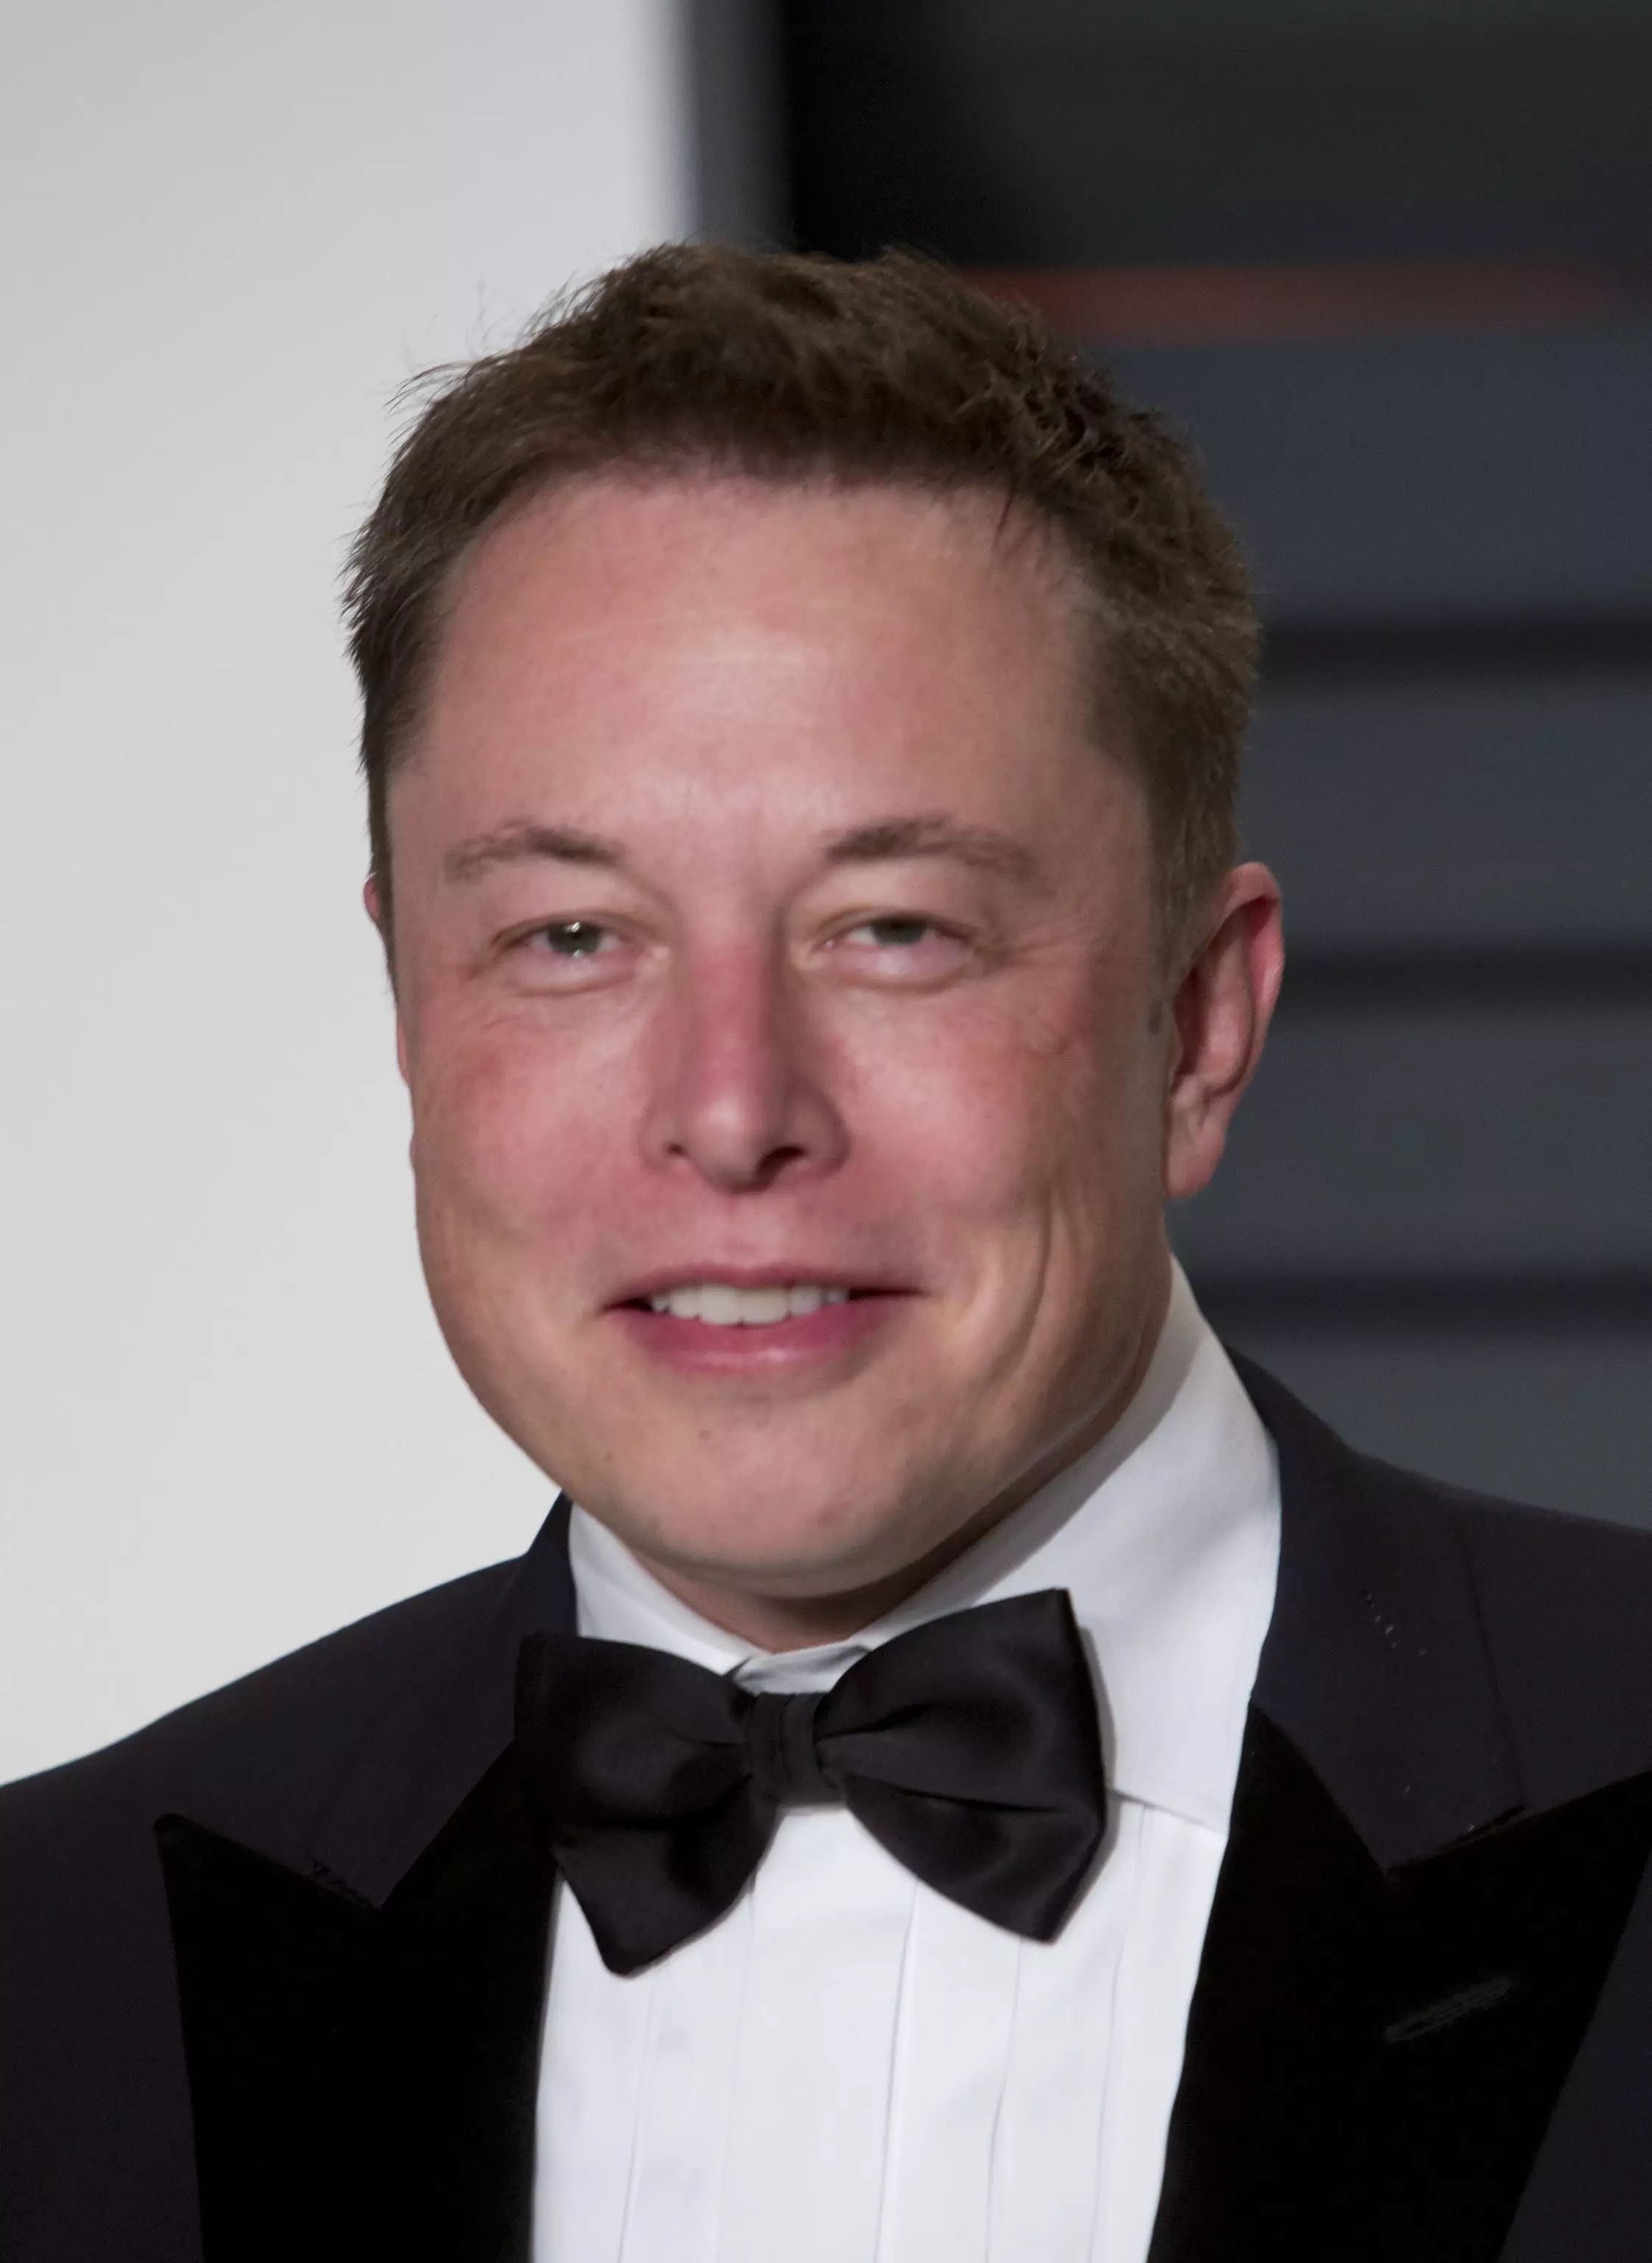 Elon Musk owns SpaceX.